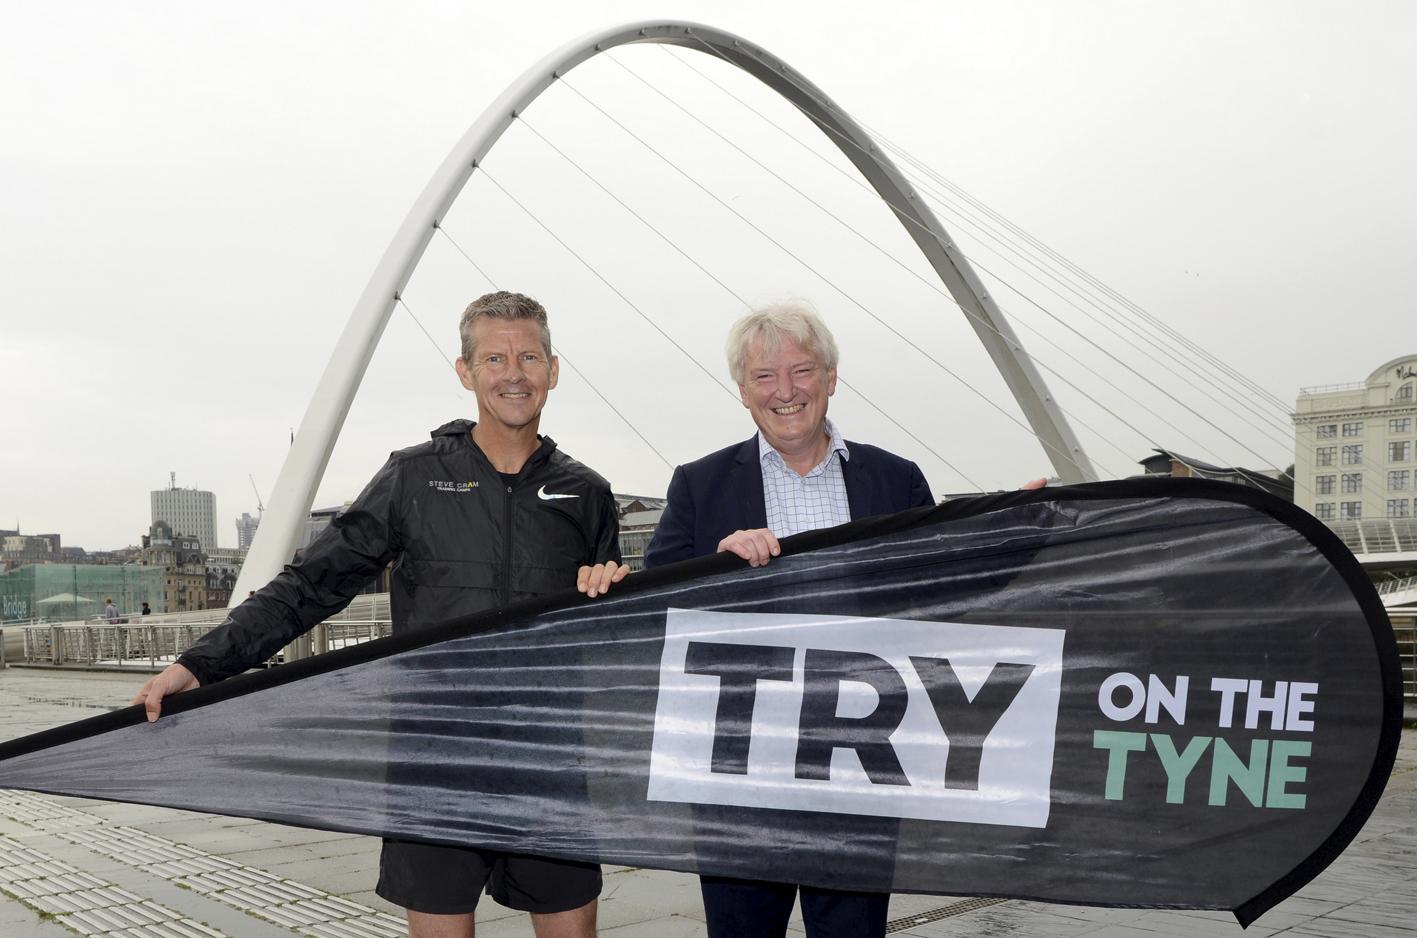 Steve Cram and Carsten Staehr of Cintra, title sponsor of TRY on the Tyne.